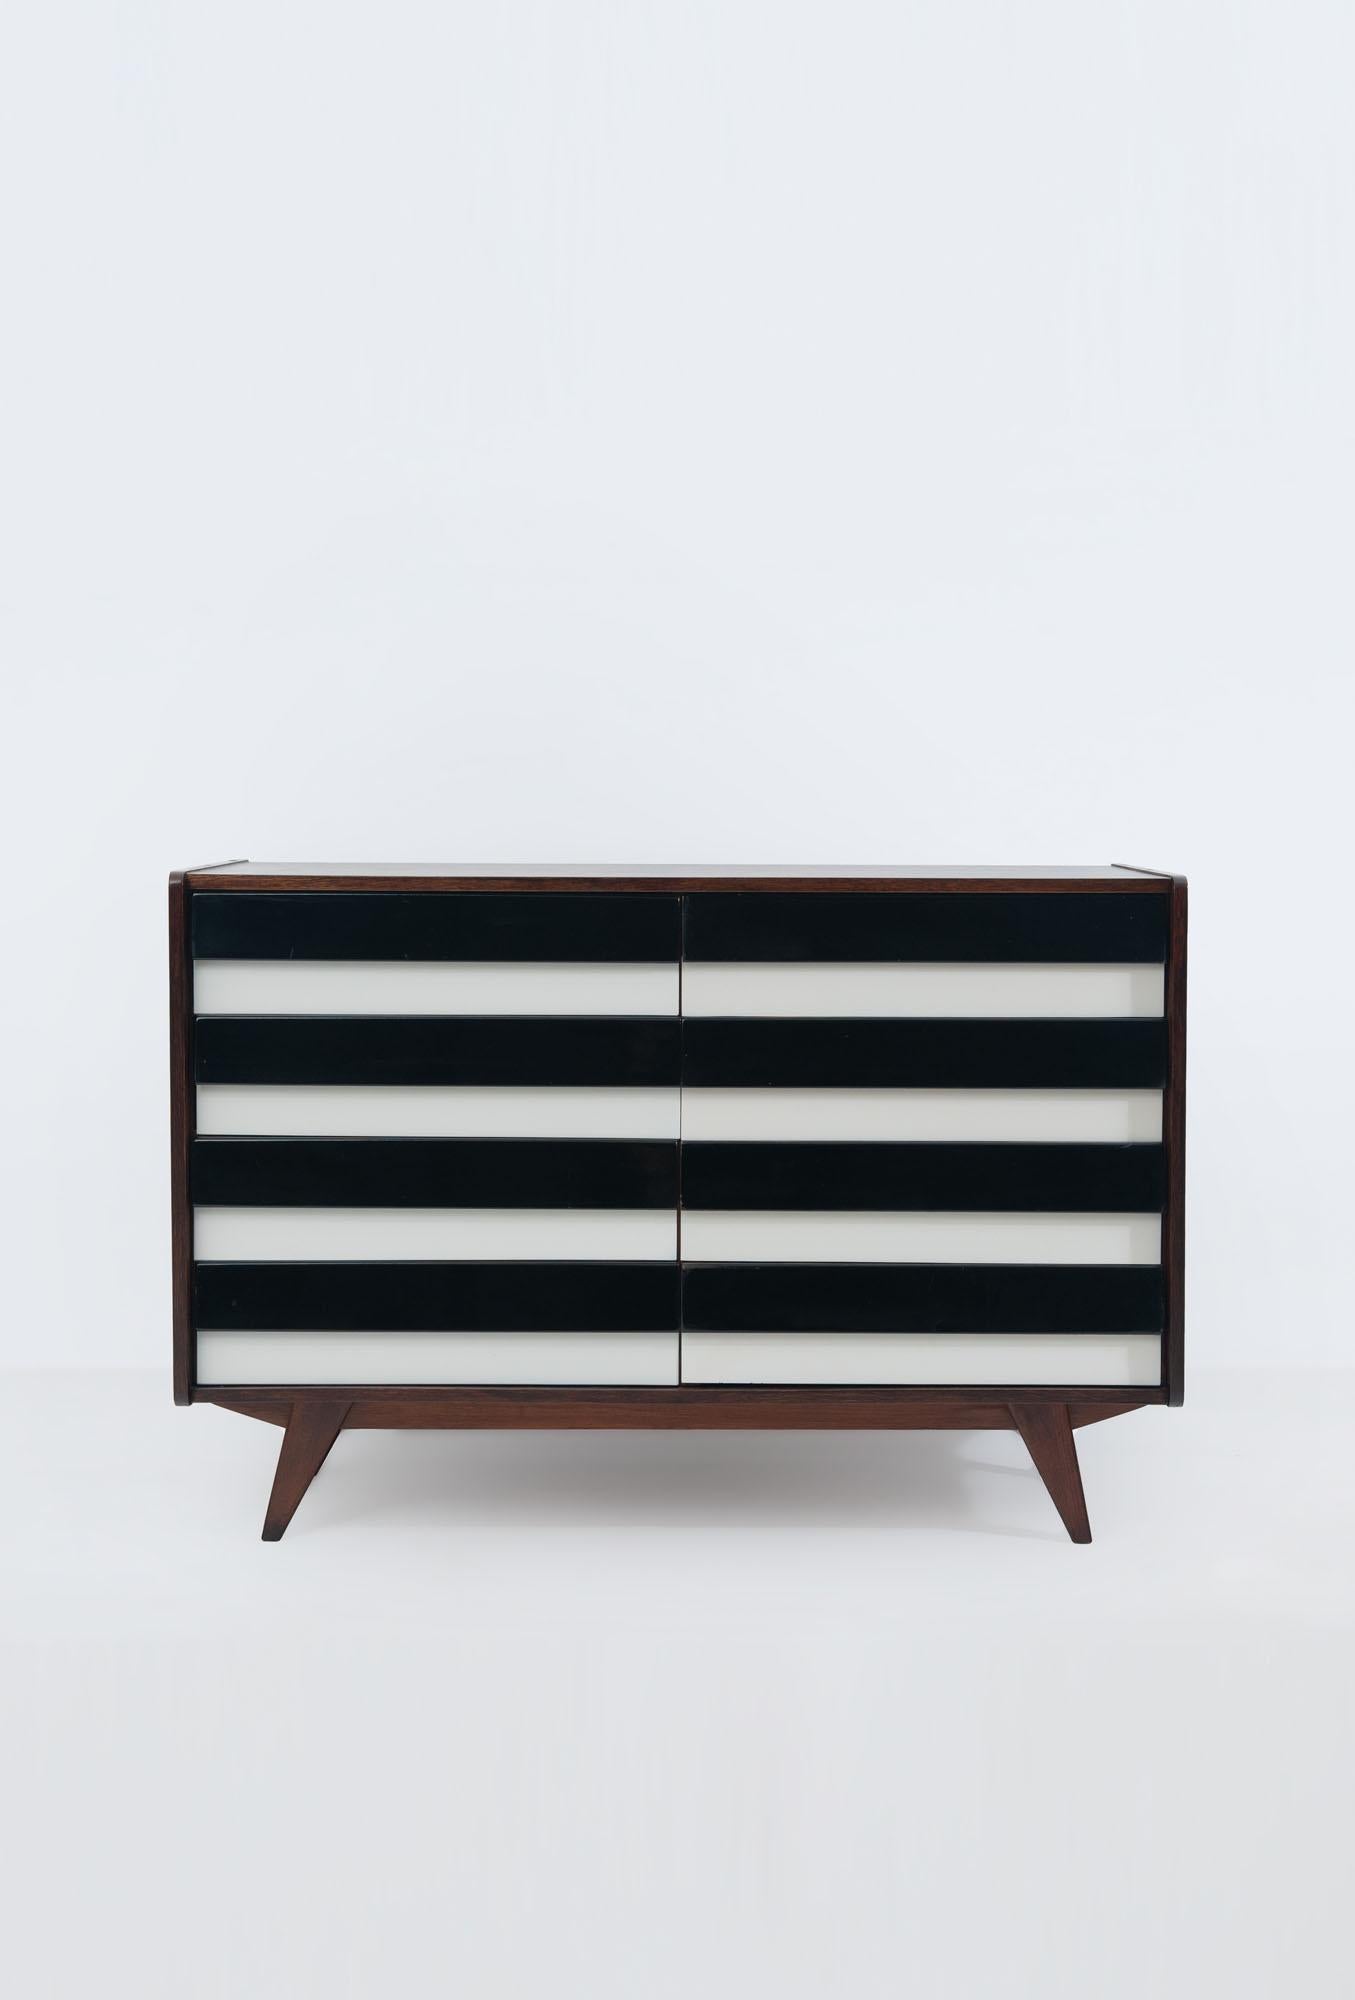 U-453 chest of drawers by Jiri Jiroutek for Interier Praha, former Czechoslovakia. 1960s.
Oak veneered and stained body. 8 wooden drawers with white formica and glossy black front.
Wood refinished, newly stained and new varnished.
Labelled. Early